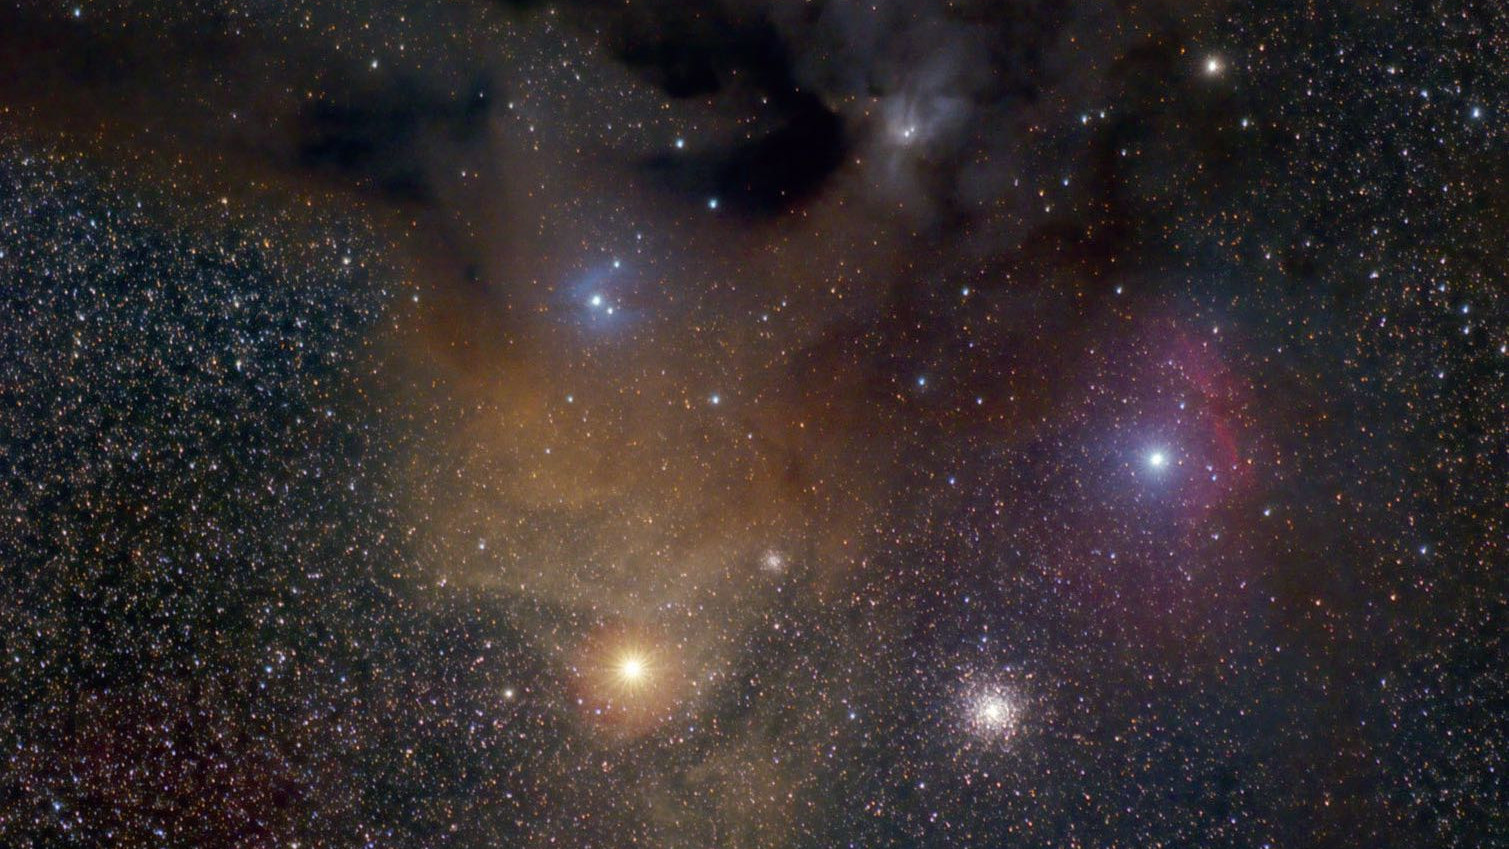 The colourful Rho Ophiuchi Nebula Complex and its surroundings: Antares is the bright, orange star below the nebula complex, to the right of it is the globular cluster M4. Jim Thommes